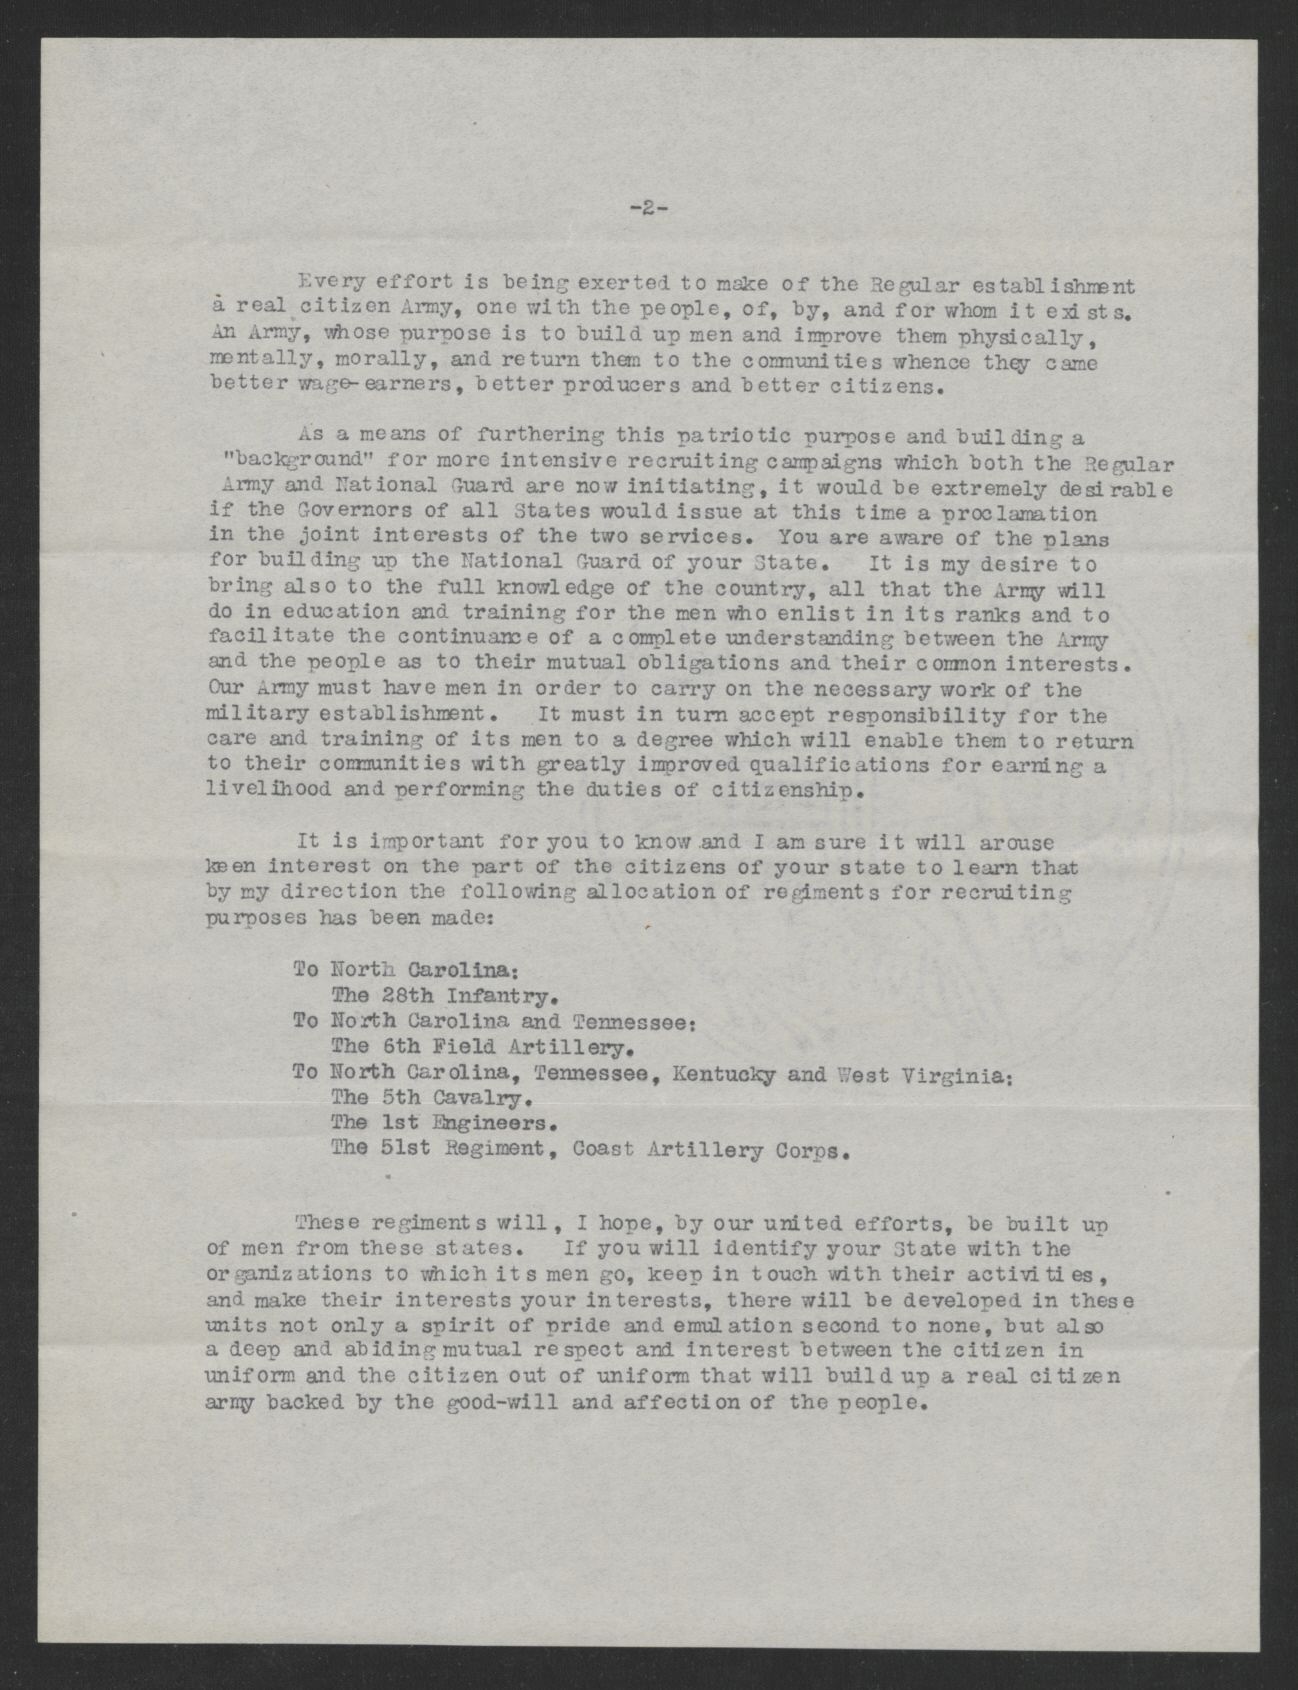 Letter from Newton D. Baker to Thomas W. Bickett, January 24, 1920, page 2